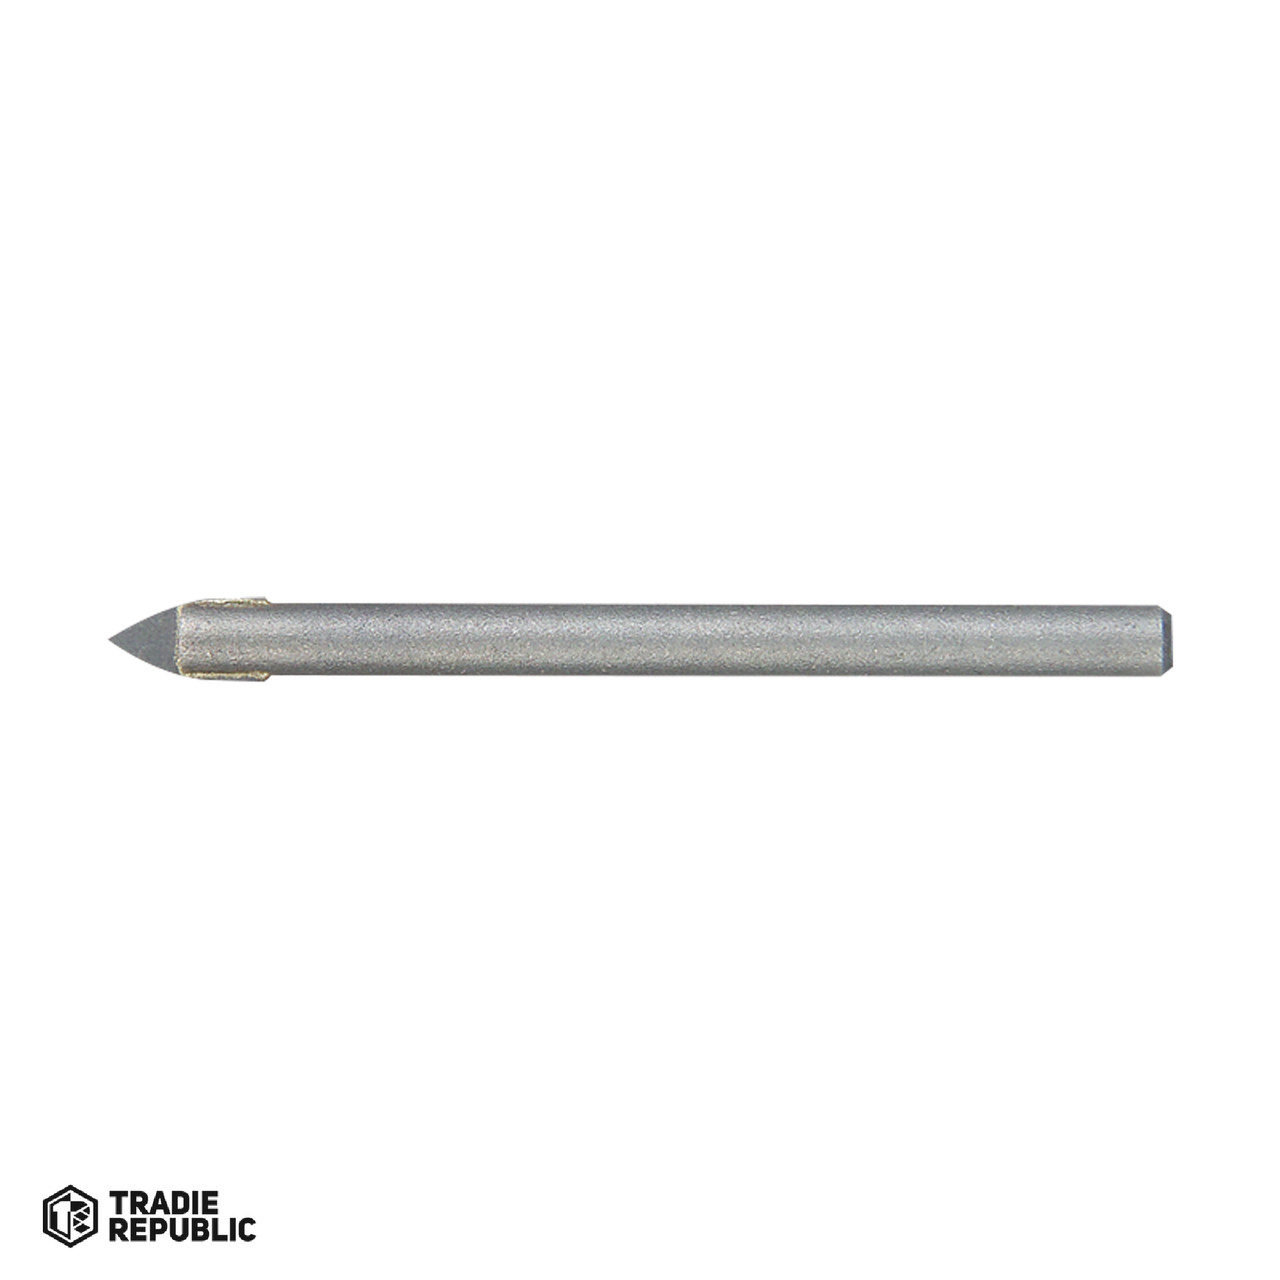 D-25127 Makita Tile and Glass Drill Bit 4x65mm 1PC